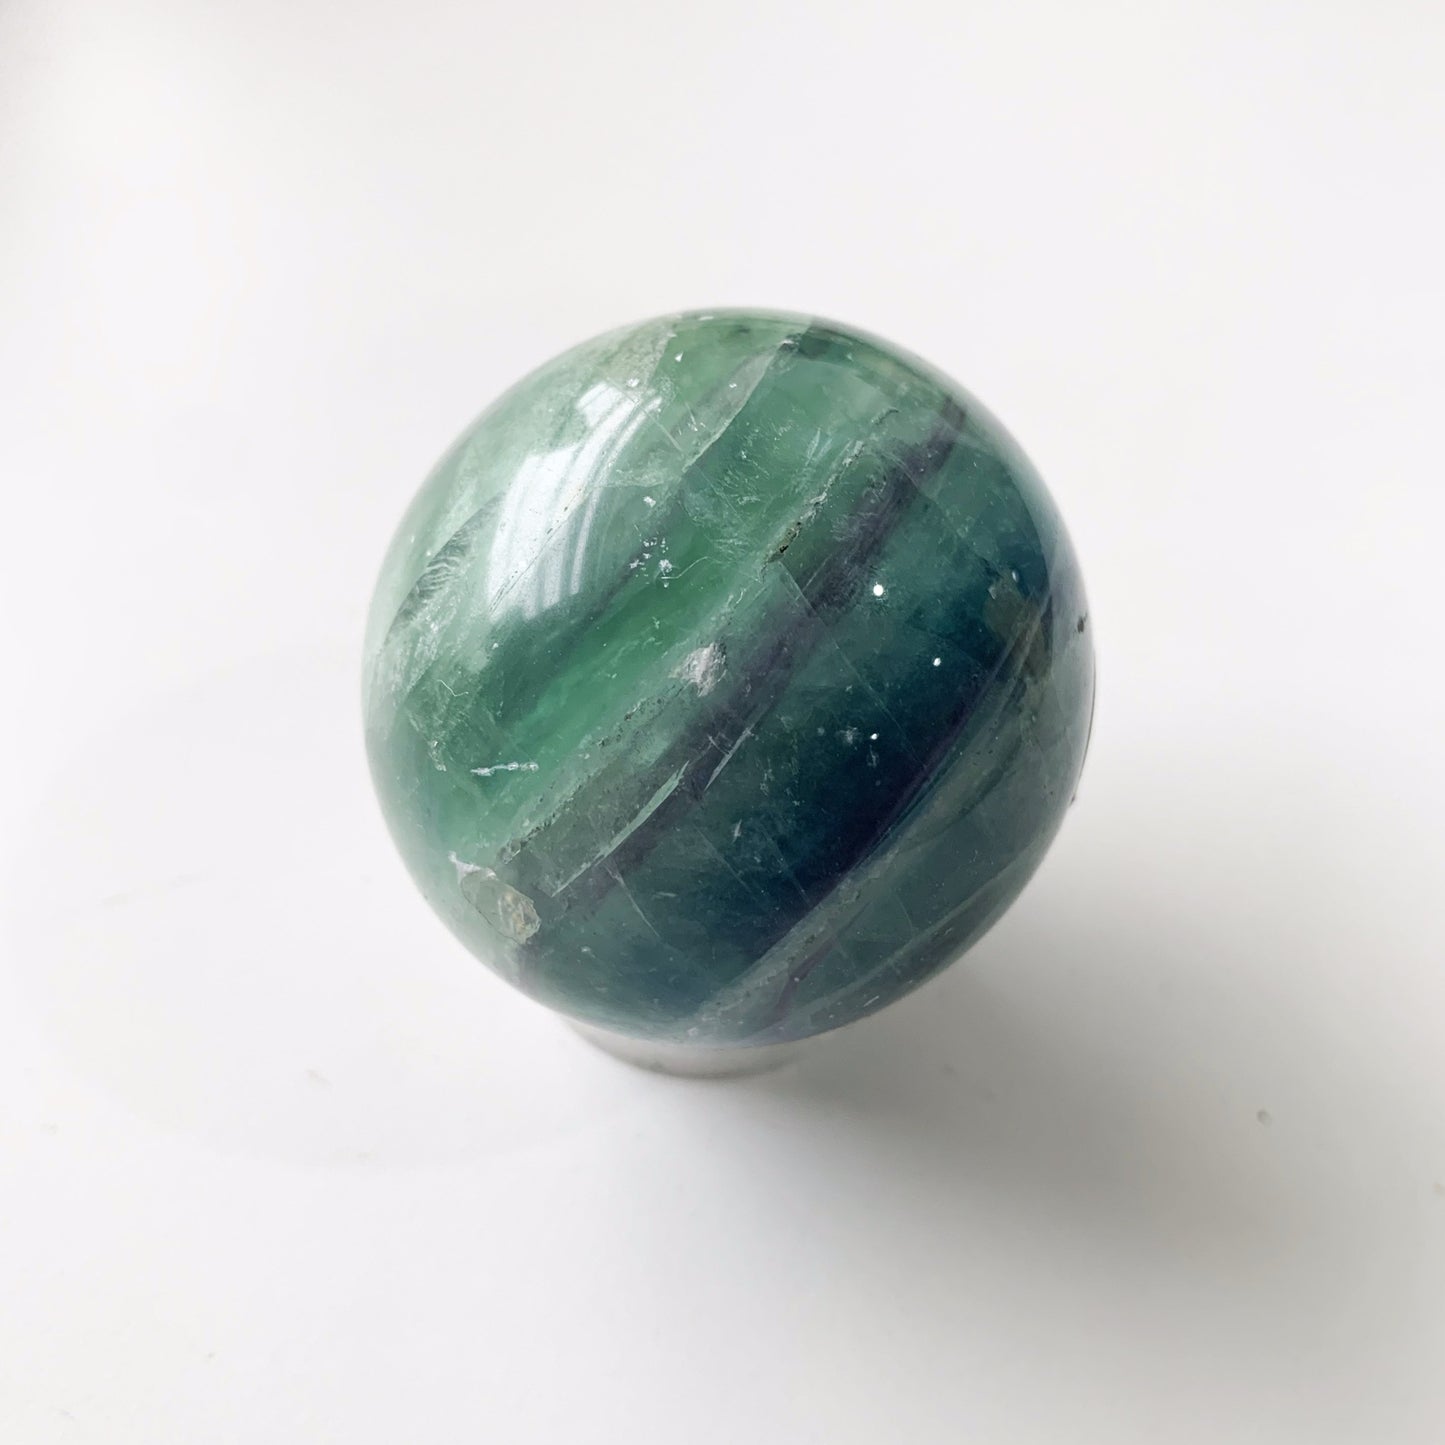 Known as the “Genius Stone,” Fluorite represents the highest state of mental achievement, boosting aptitude and discernment, the absorption of new information, and helping one work through complex issues.